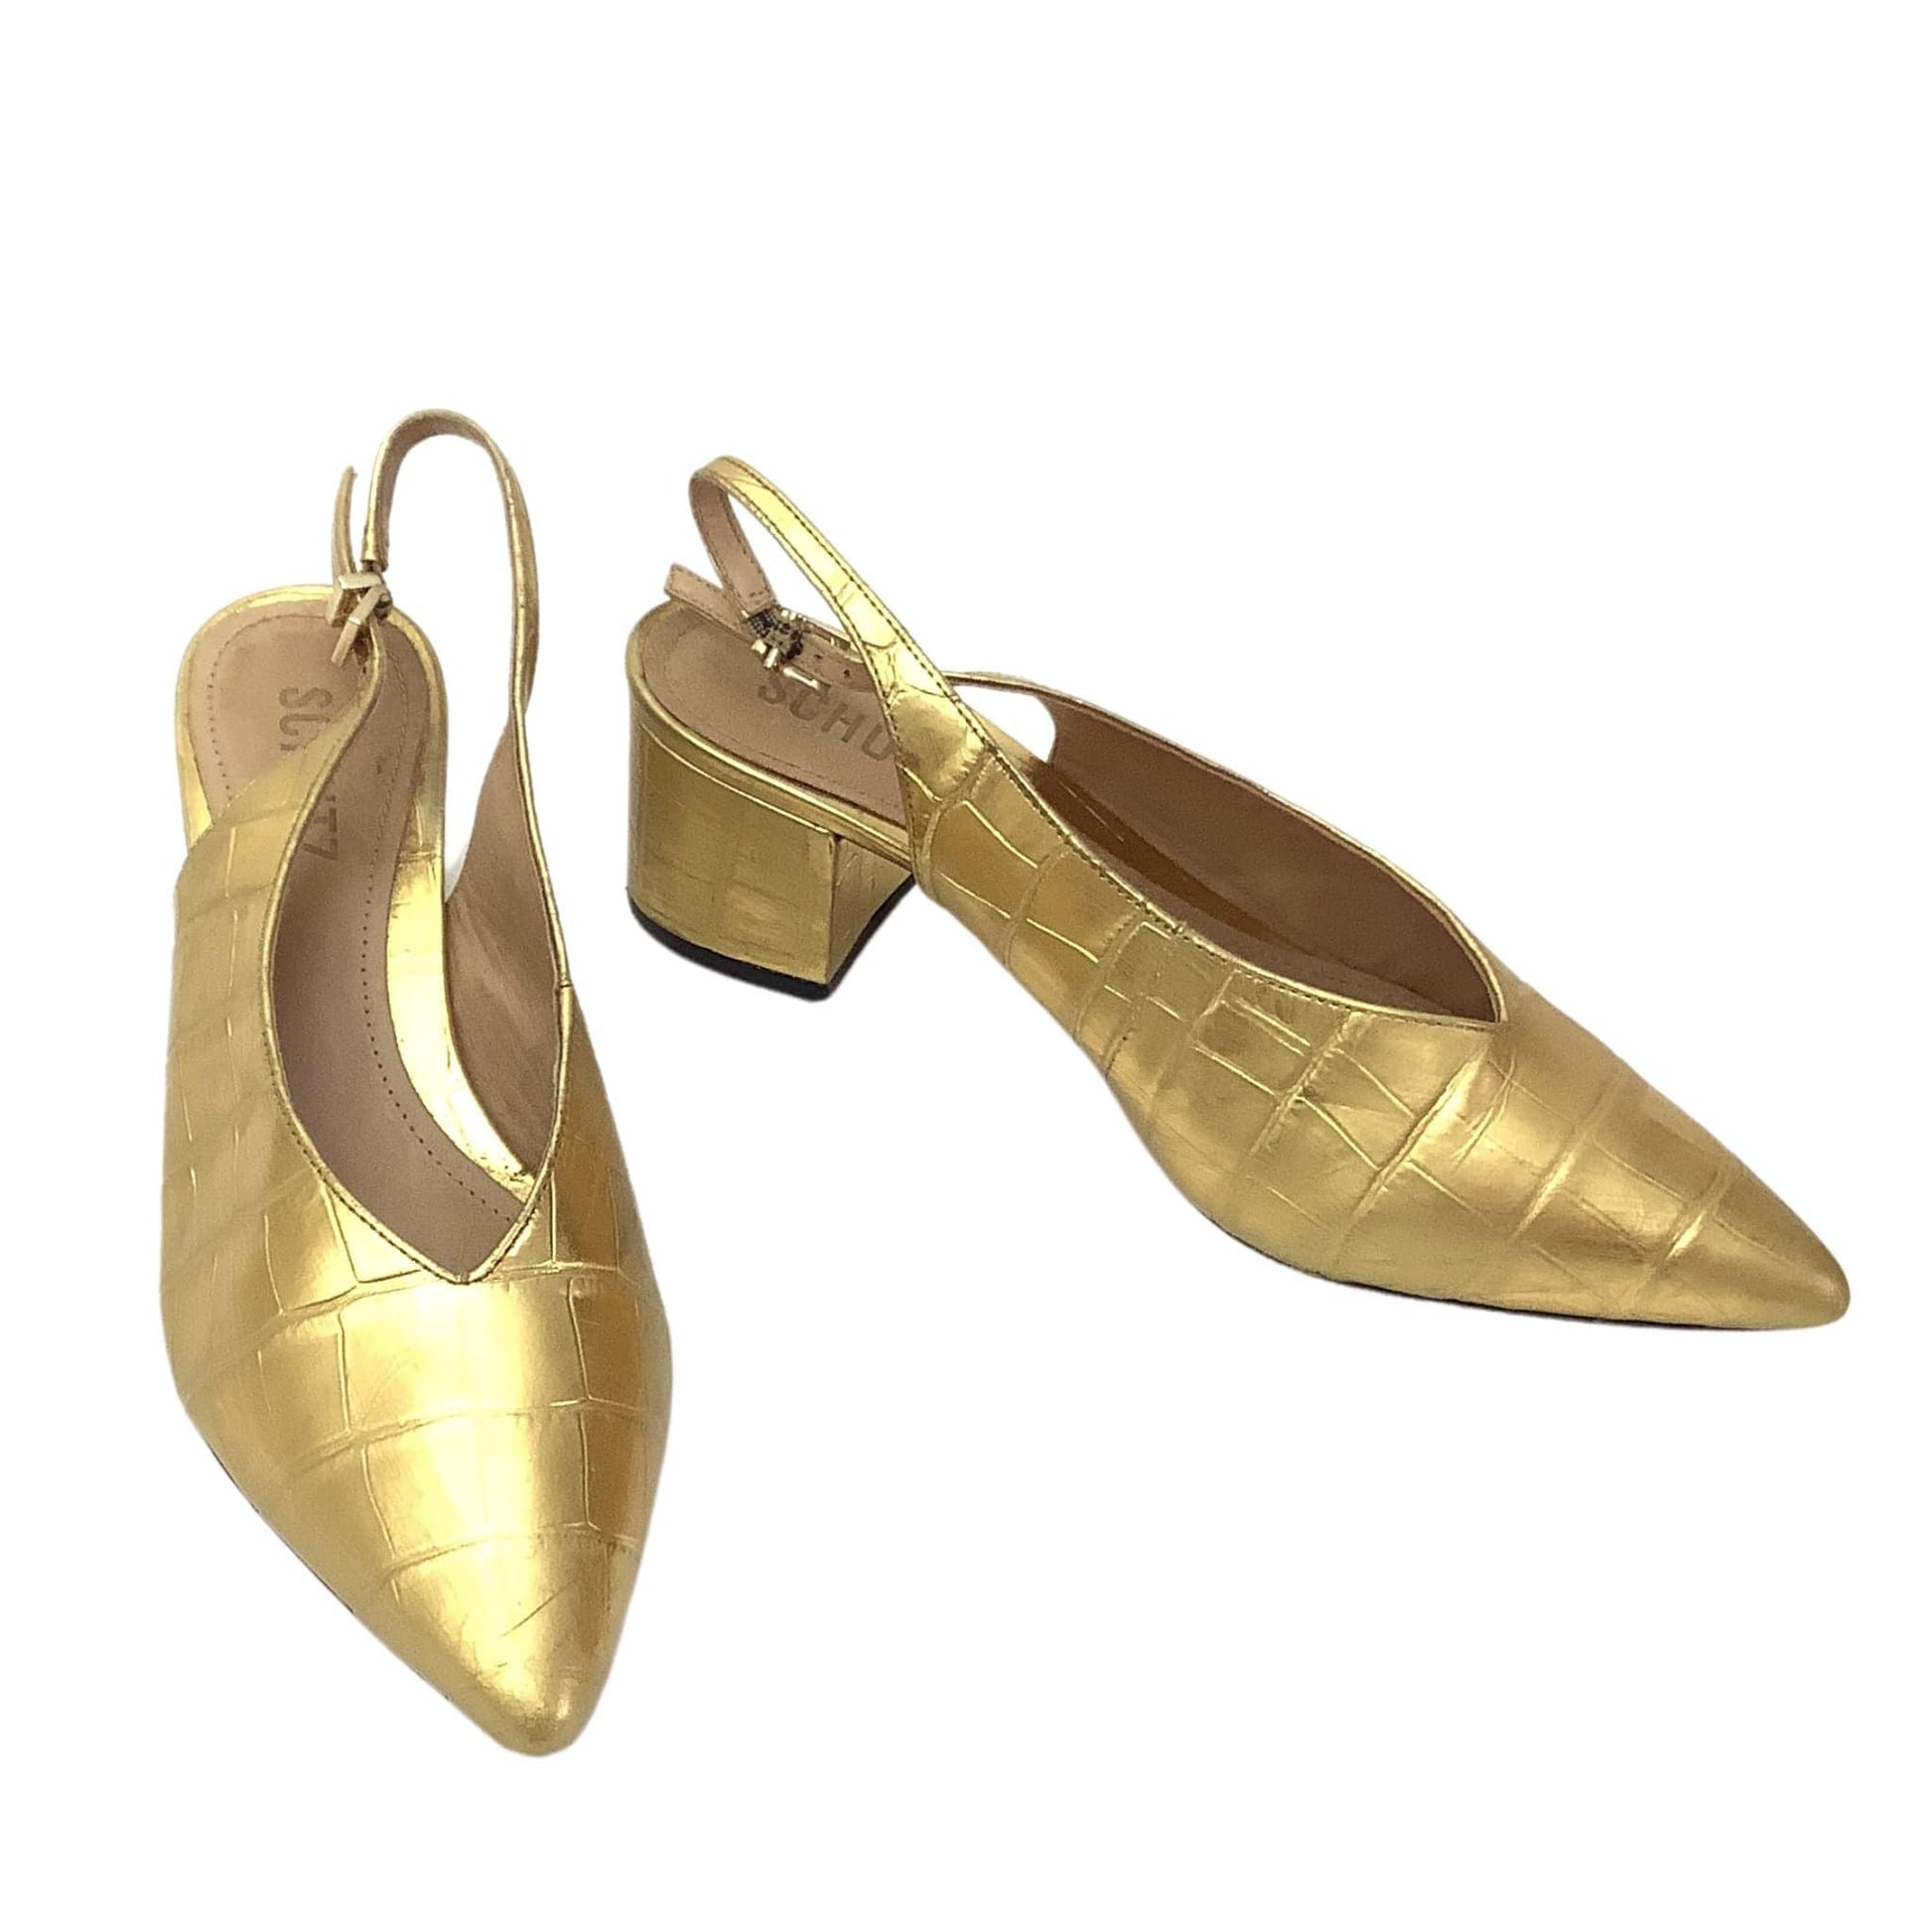 Gold Pointed Toe Heels 7 / Gold / Y2K - Now